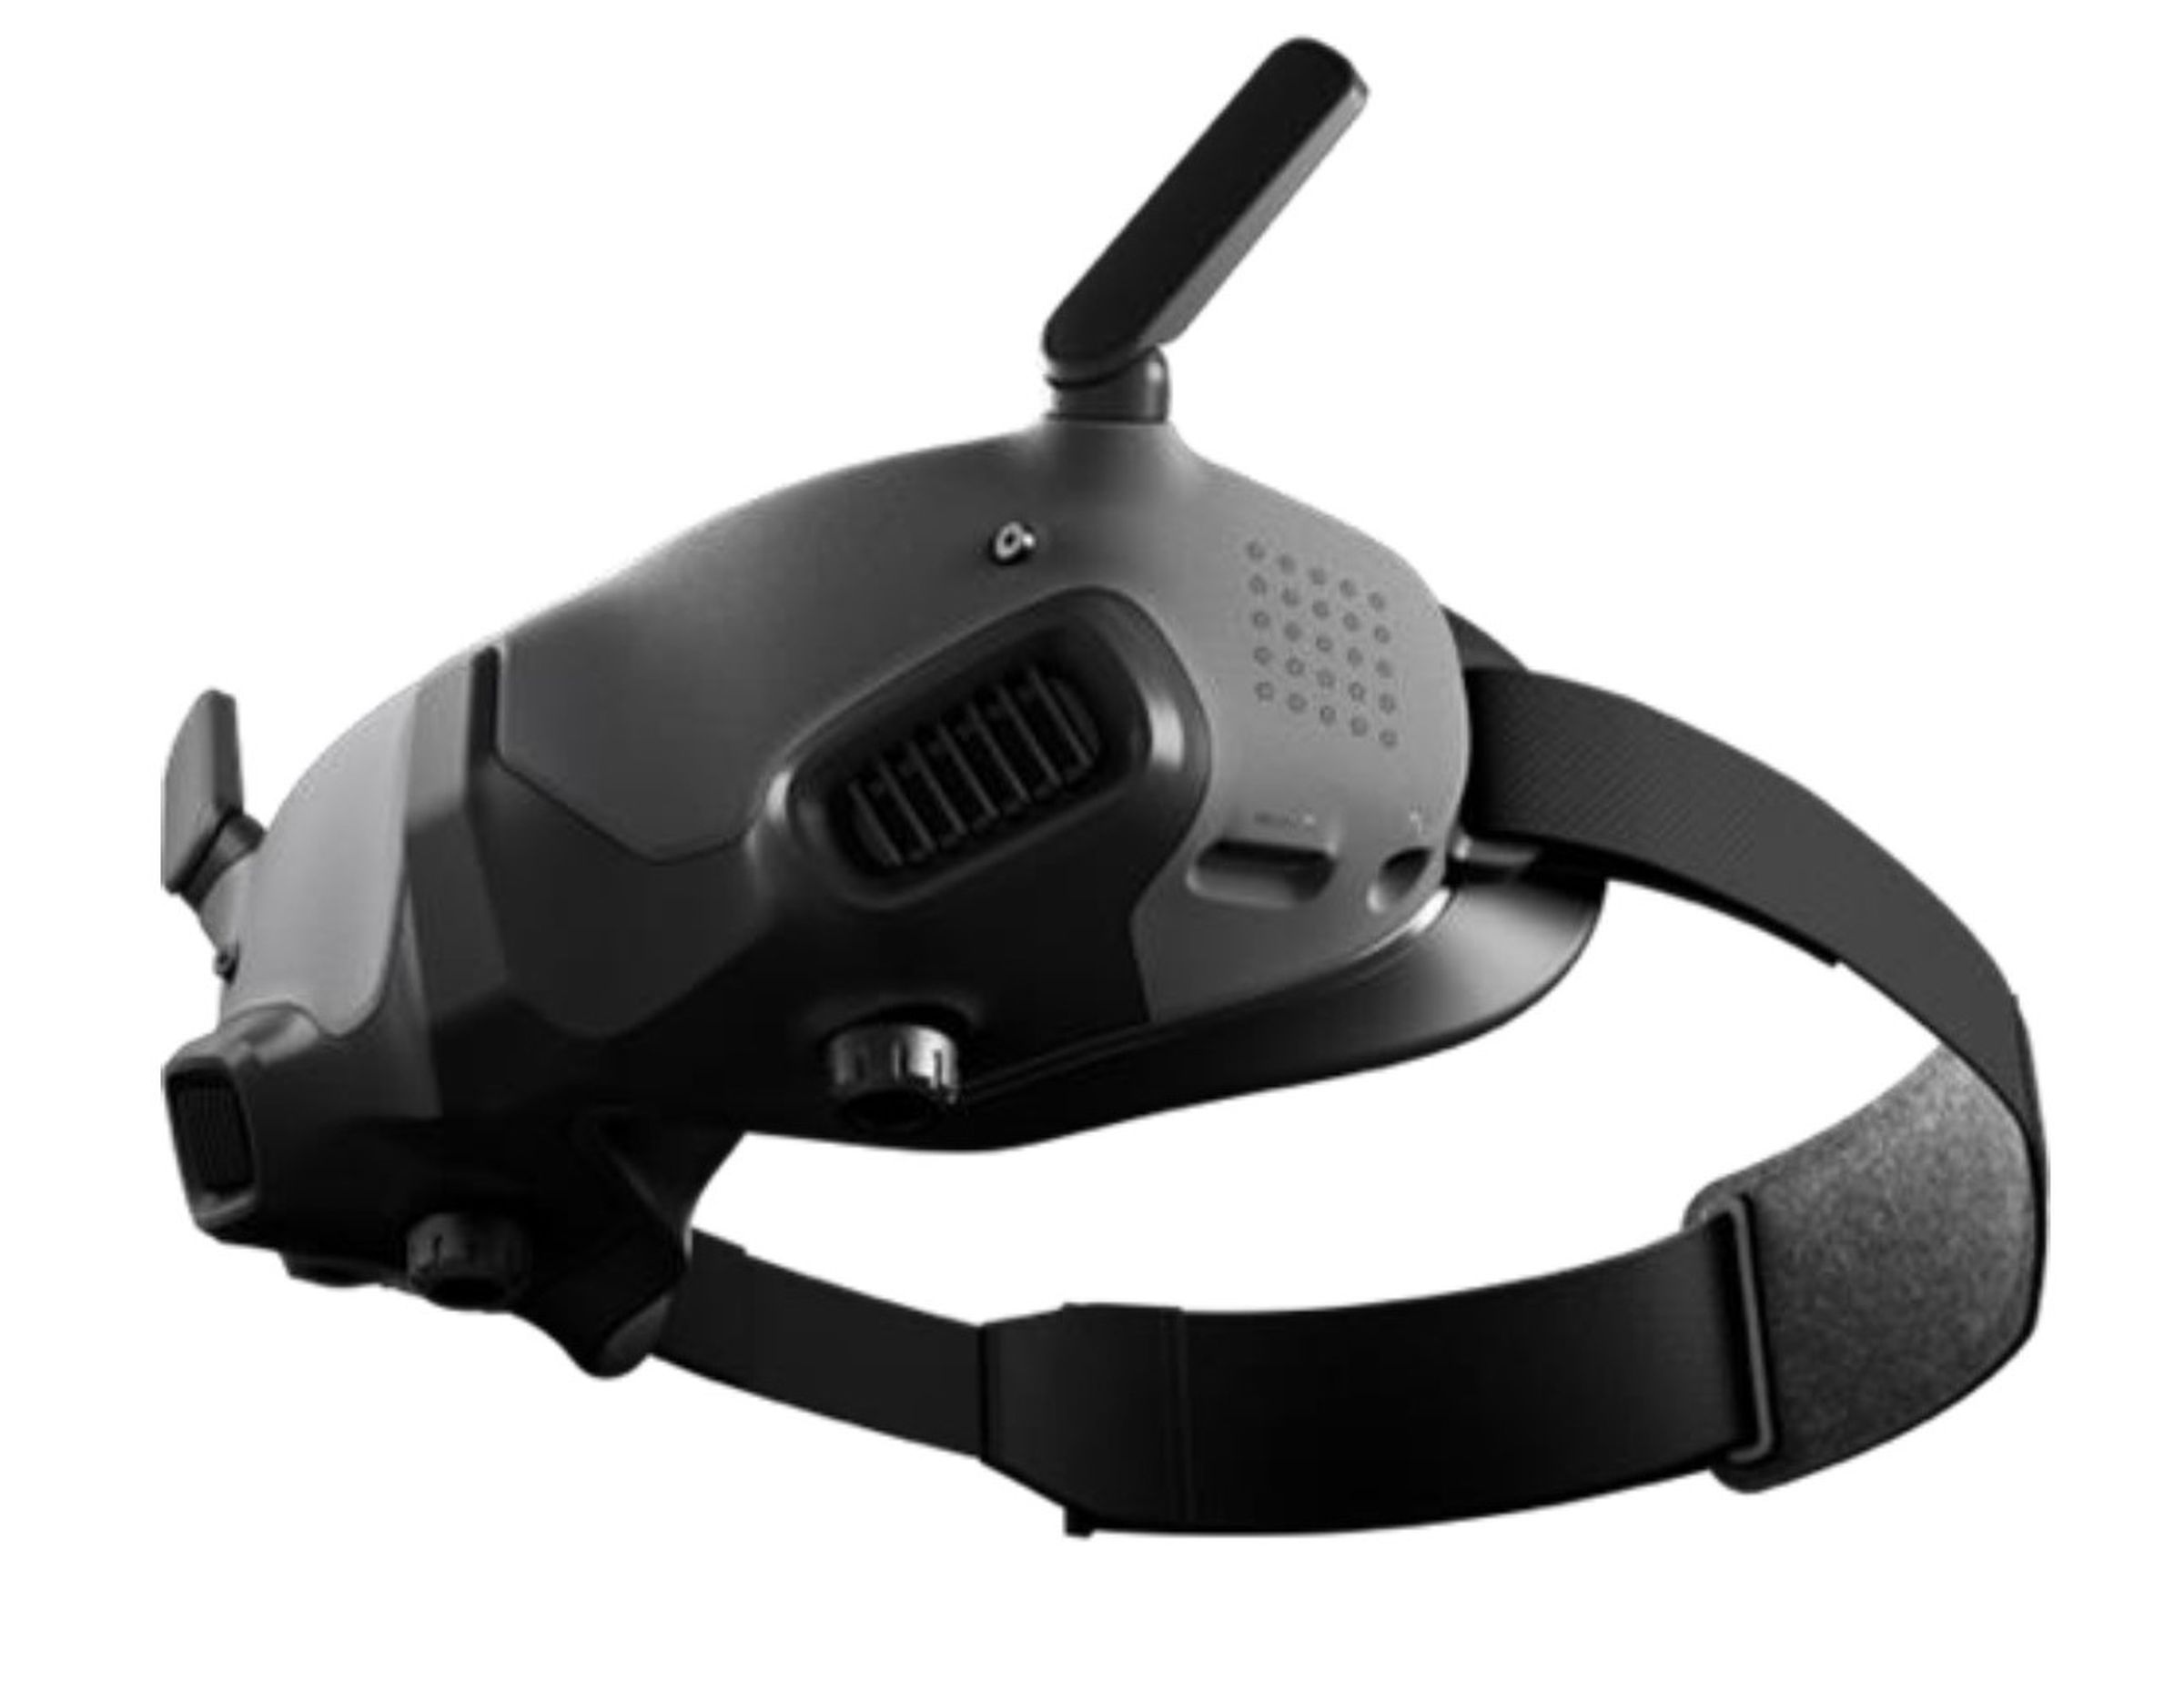 A picture of the DJI FPV Goggles 2 headset from the side against a white background